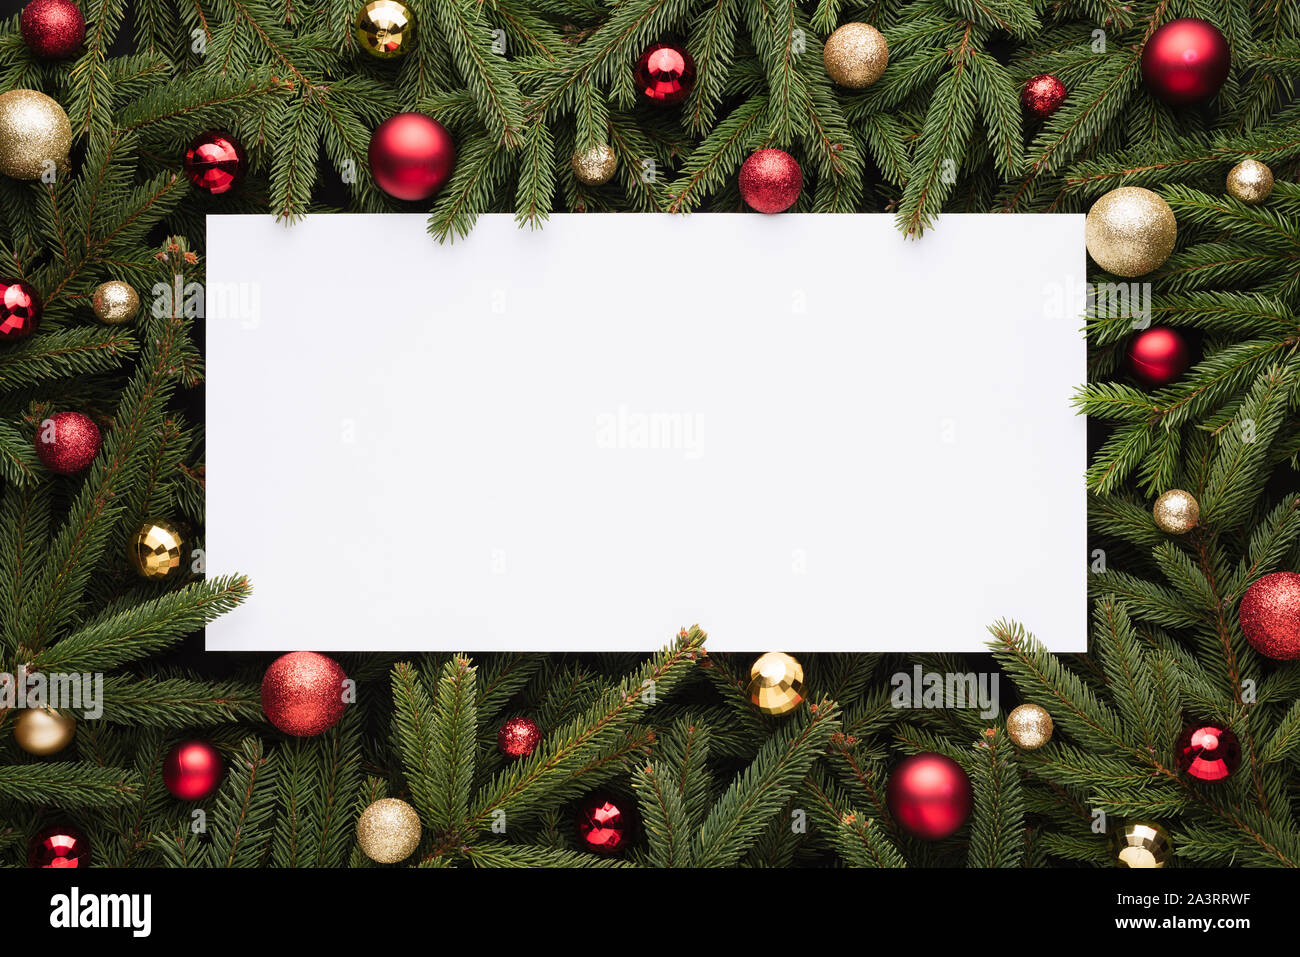 Christmas or New Year decoration background with copy space. Festive frame of fir branches and Christmas balls Stock Photo